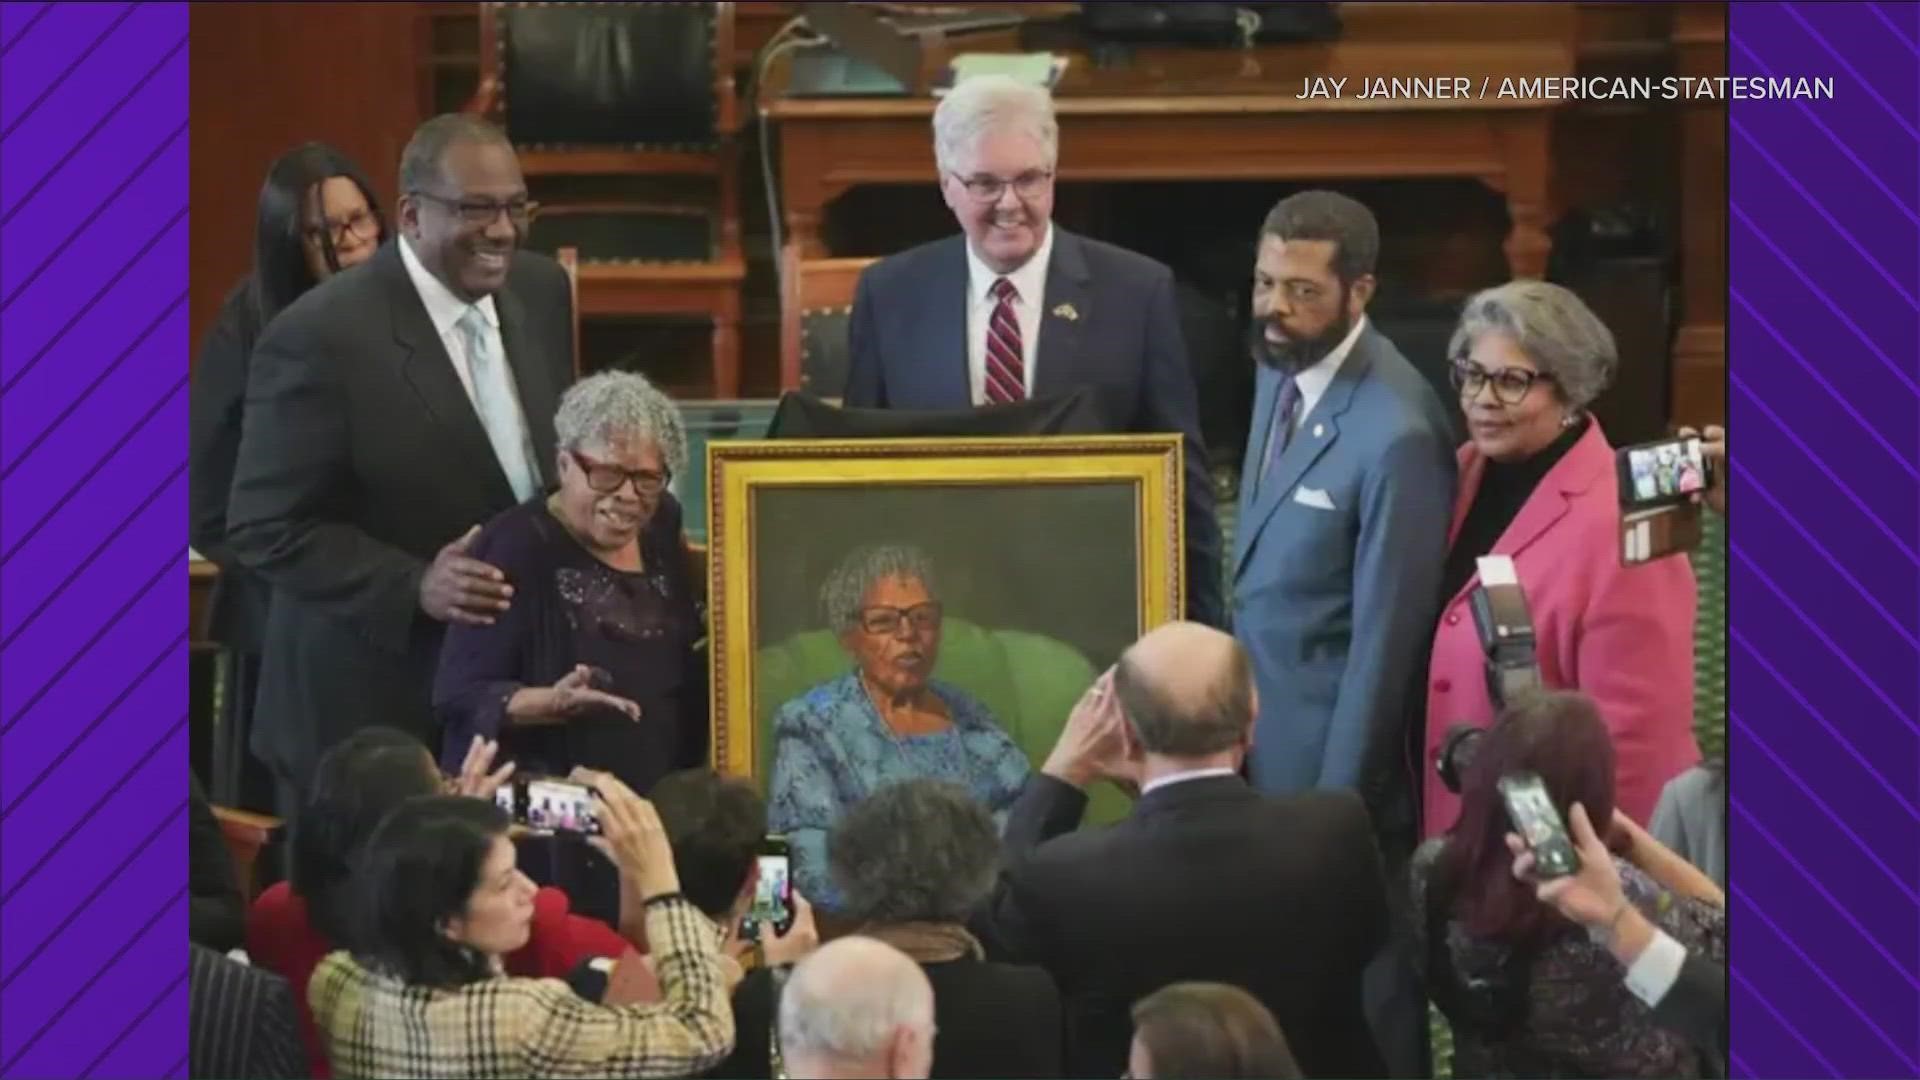 For the first time in 43 years, a new portrait is being added to the Texas Legislature's upper chamber. The members unveiled a portrait of Opal Lee on Wednesday.